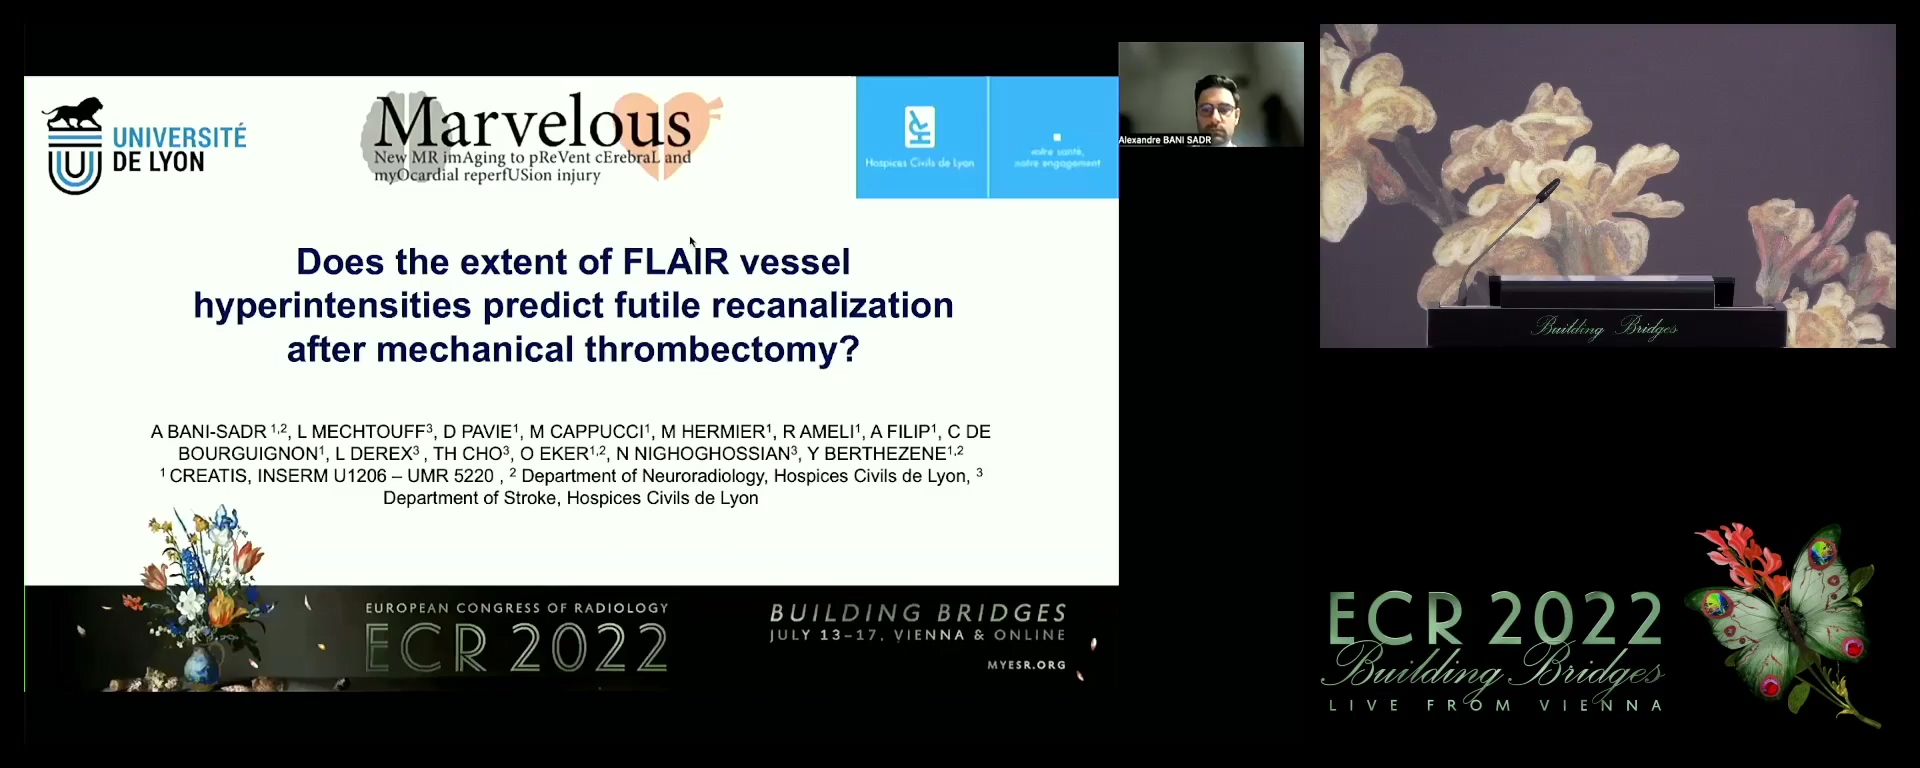 Does the extent of FLAIR vessel hyperintensities predict futile recanalisation after mechanical thrombectomy?